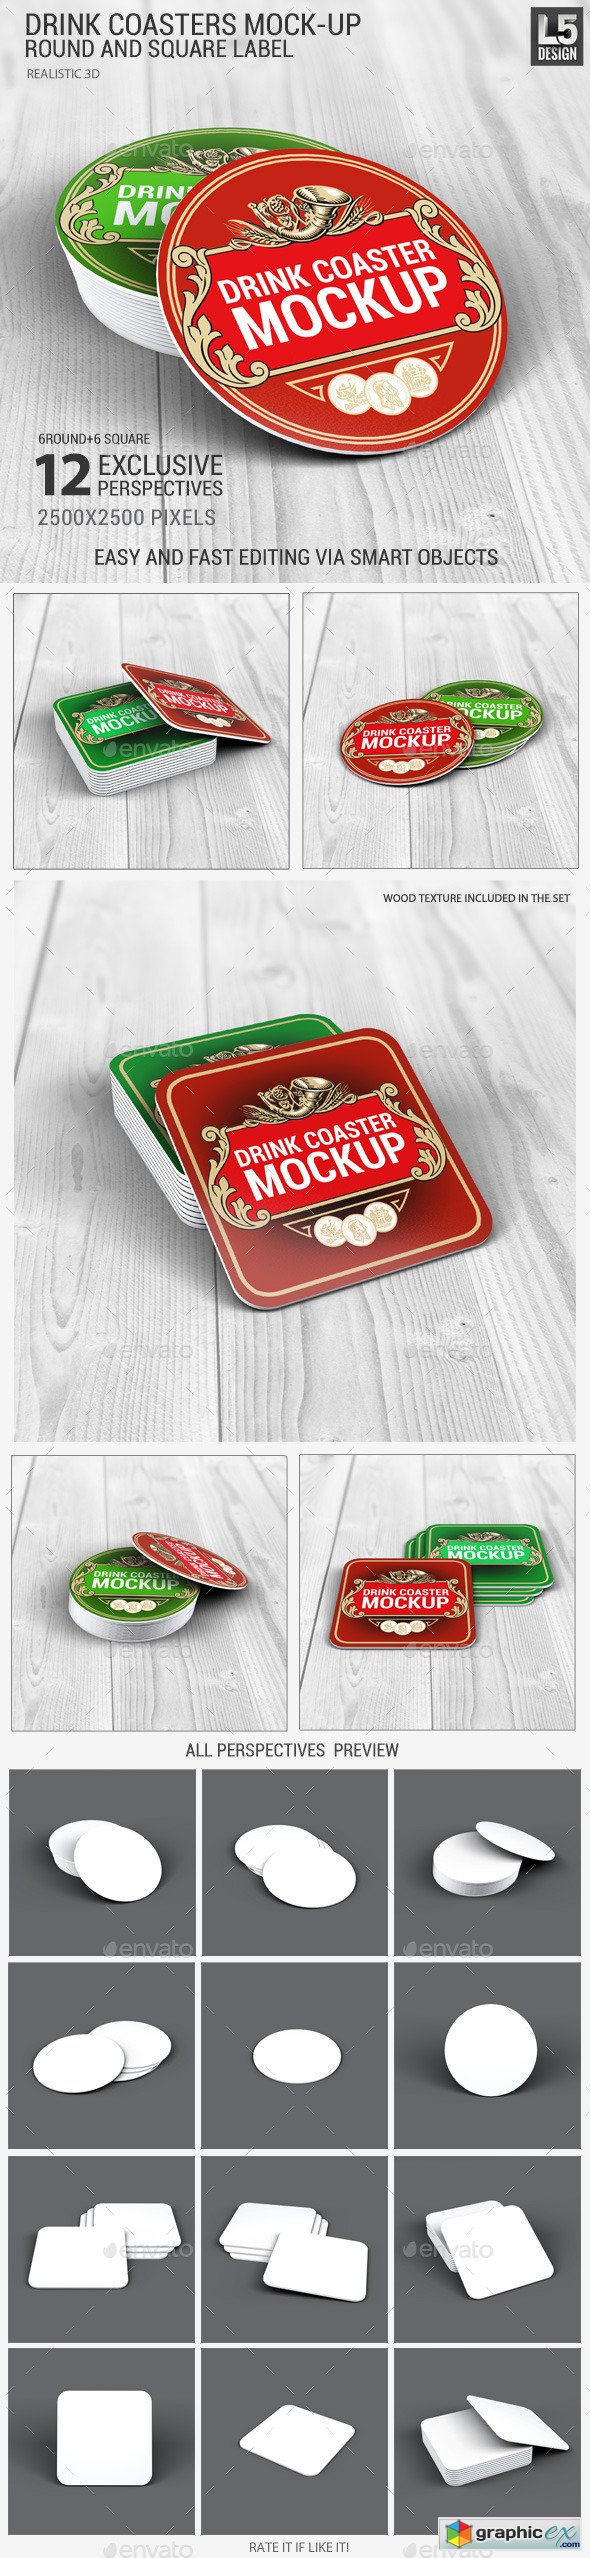 Drink Coasters Round and Square Label Mock-Up